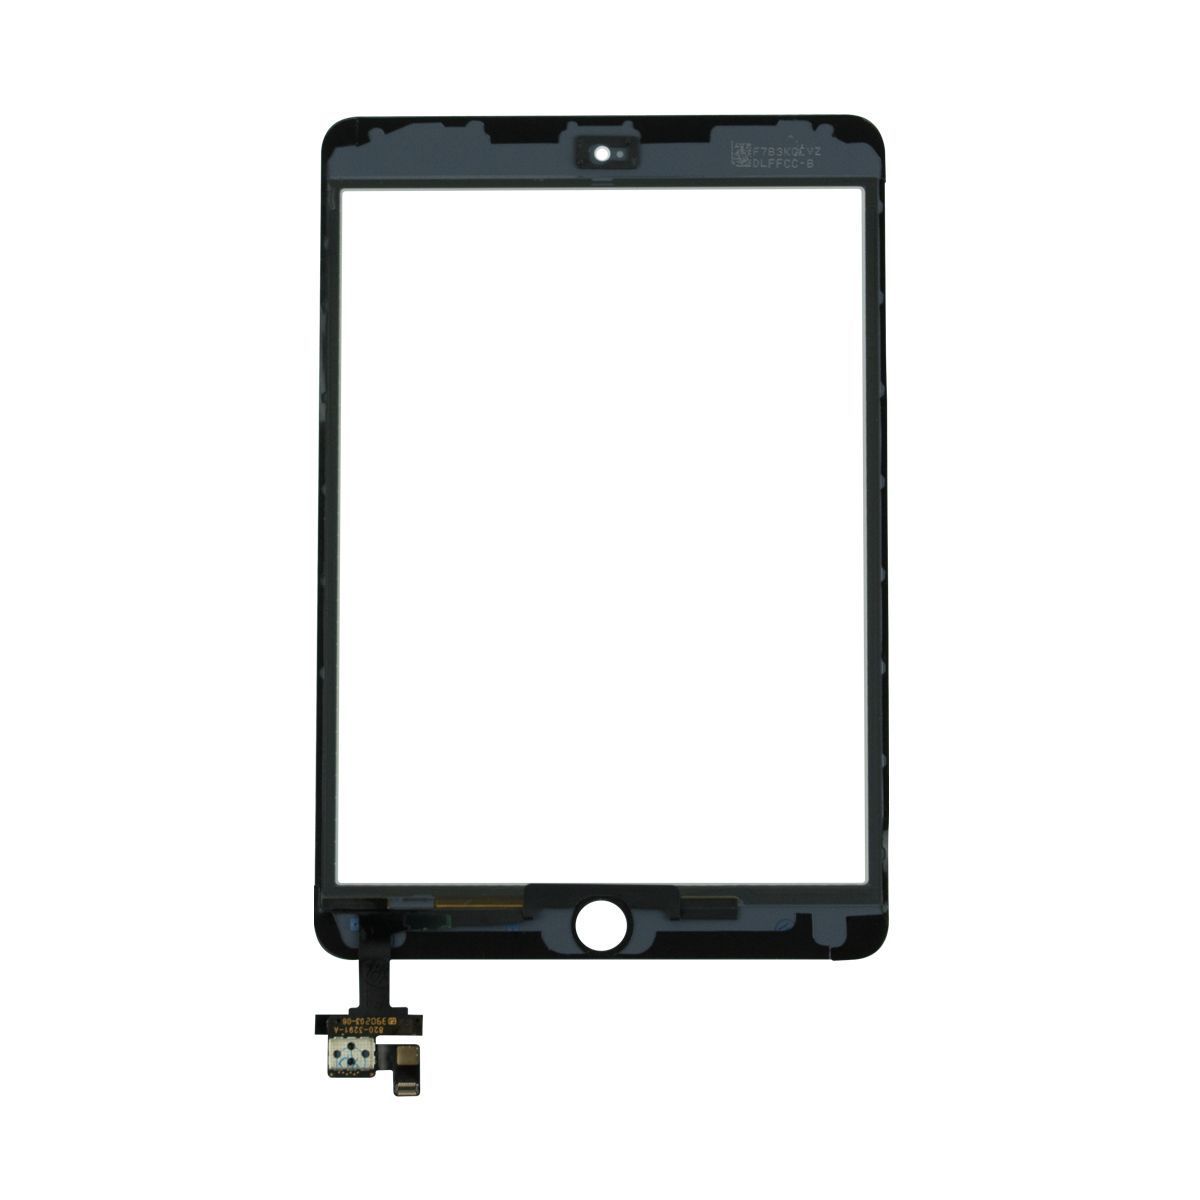 Apple iPad Mini 3 Replacement Touch Screen Assembly - Black for [product_price] - First Help Tech